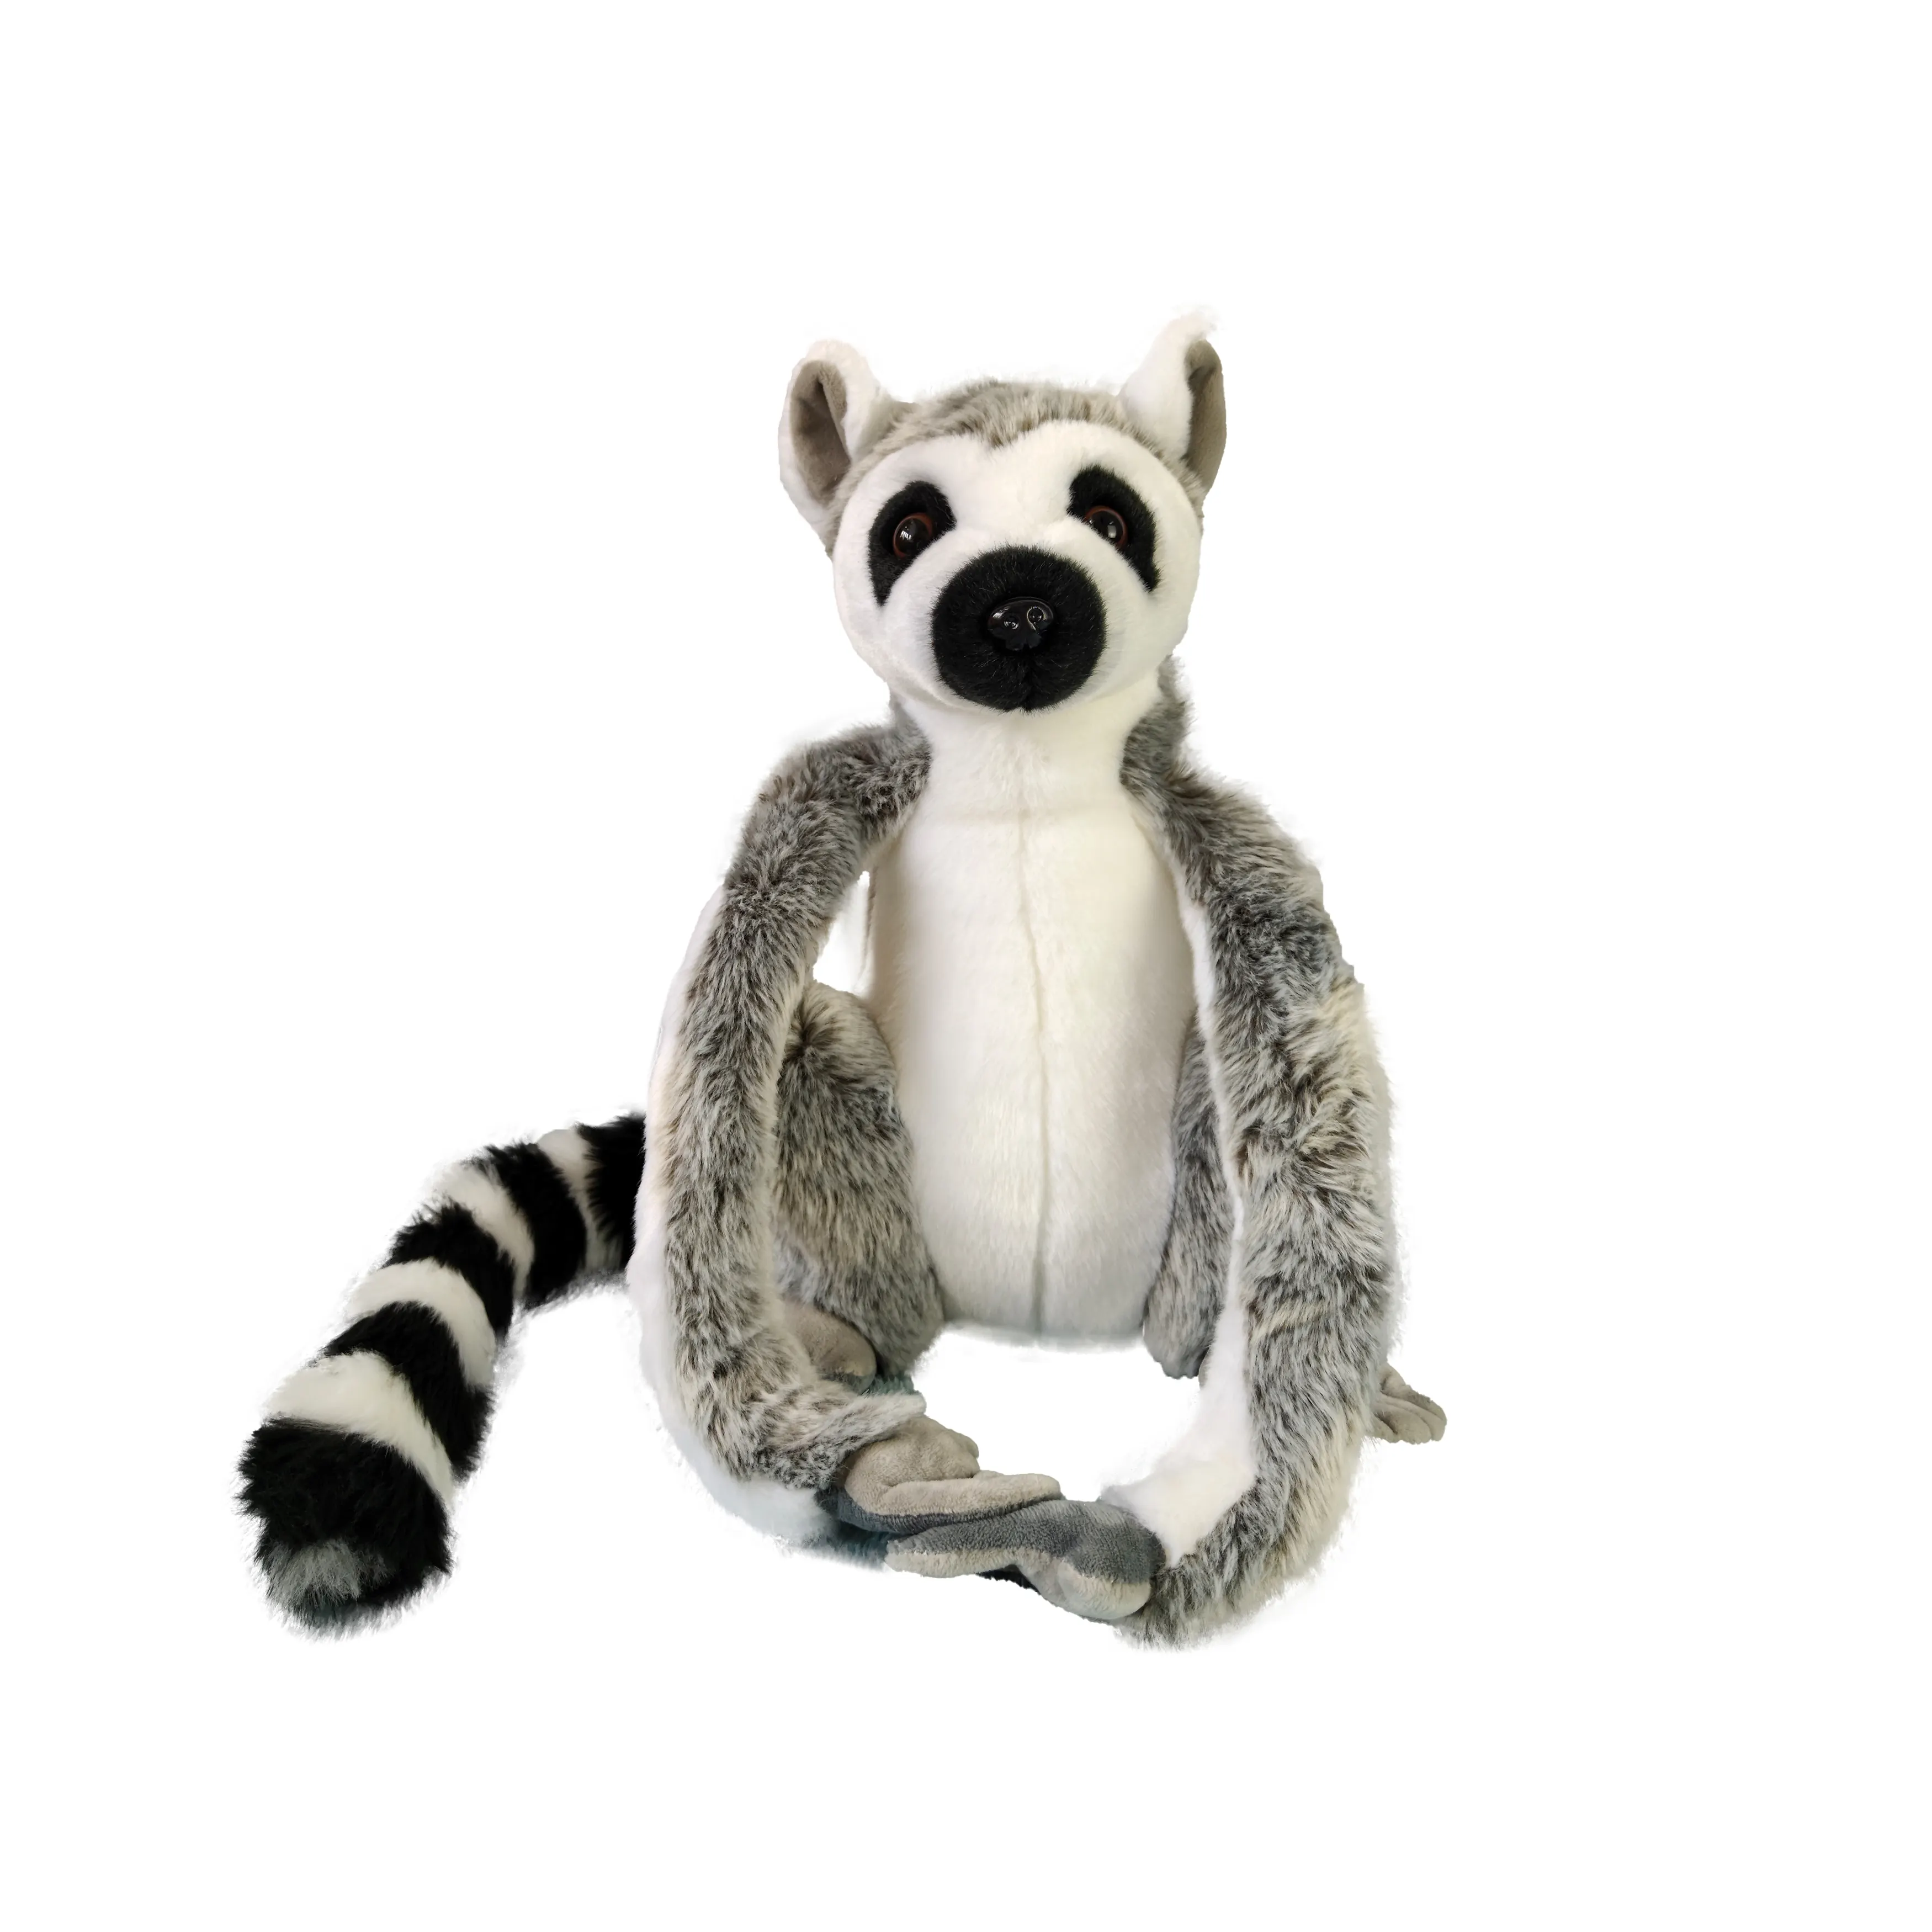 Ring Tailed Lemur Plush Stuffed Animal Realistic Monkey Soft Toys Gifts For Kids